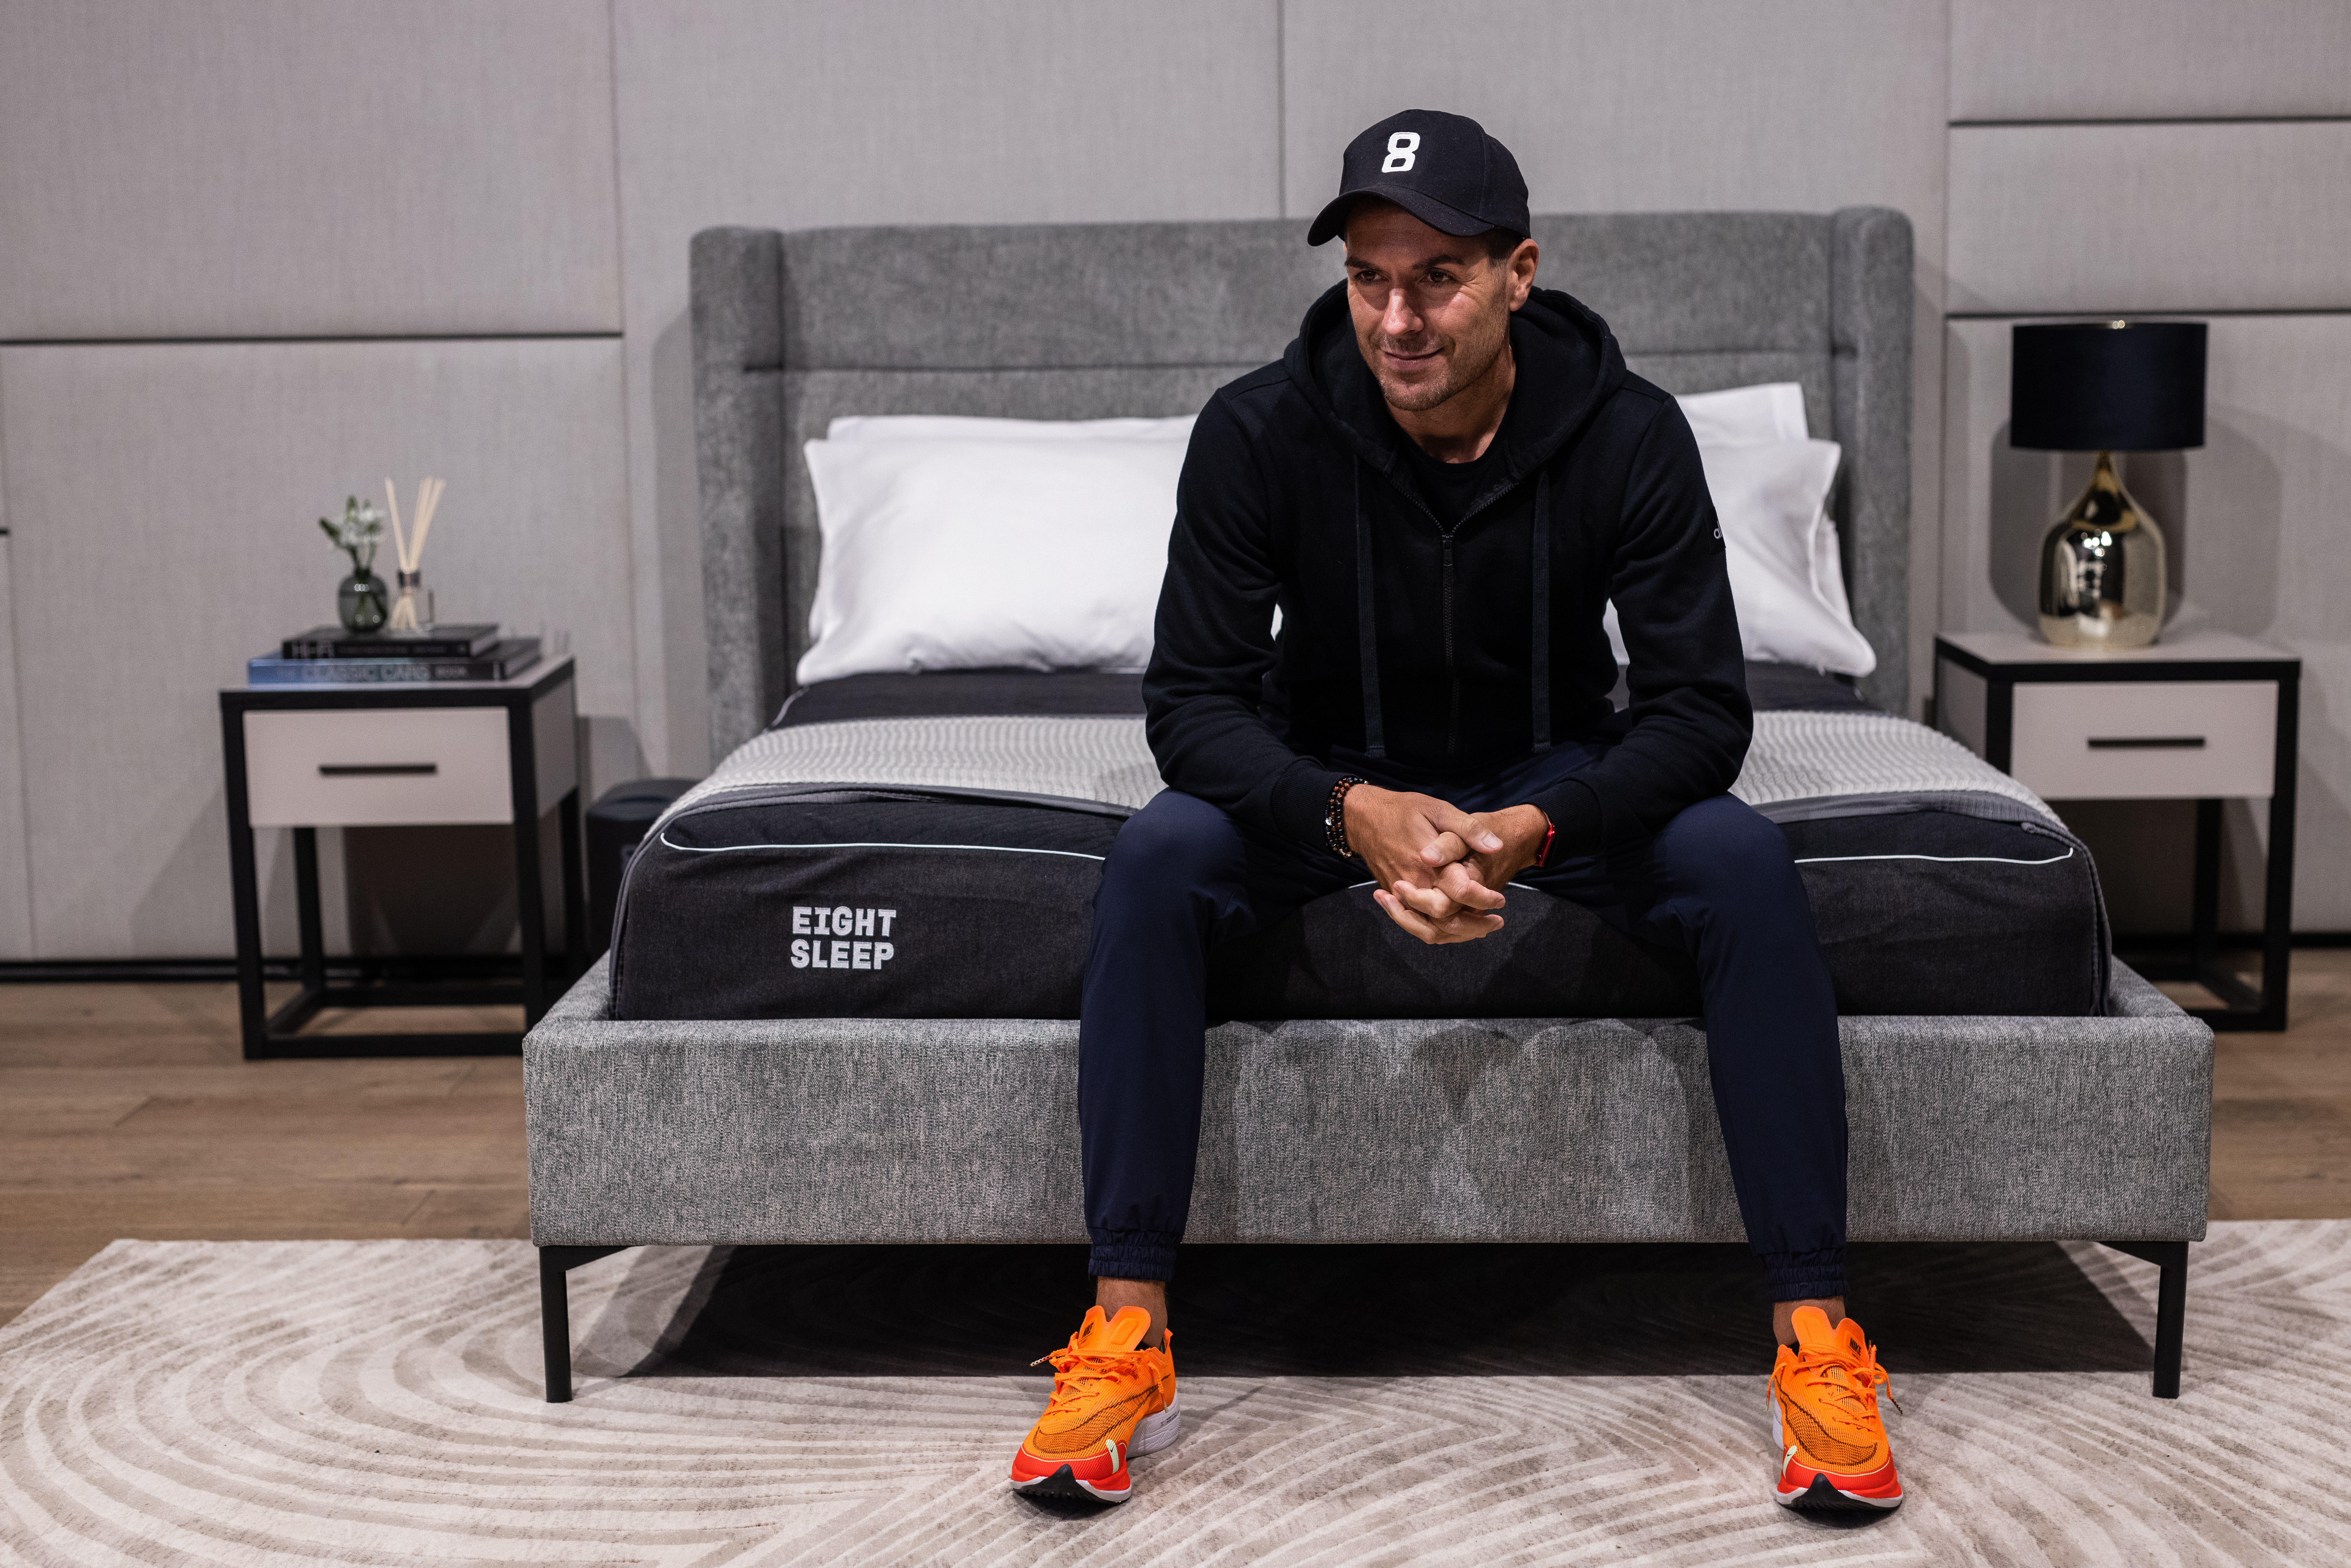 , Lewis Hamilton’s new secret weapon revealed as F1 icon snoozes in £2,000 ‘stethoscope’ BED in bid to end nightmare year